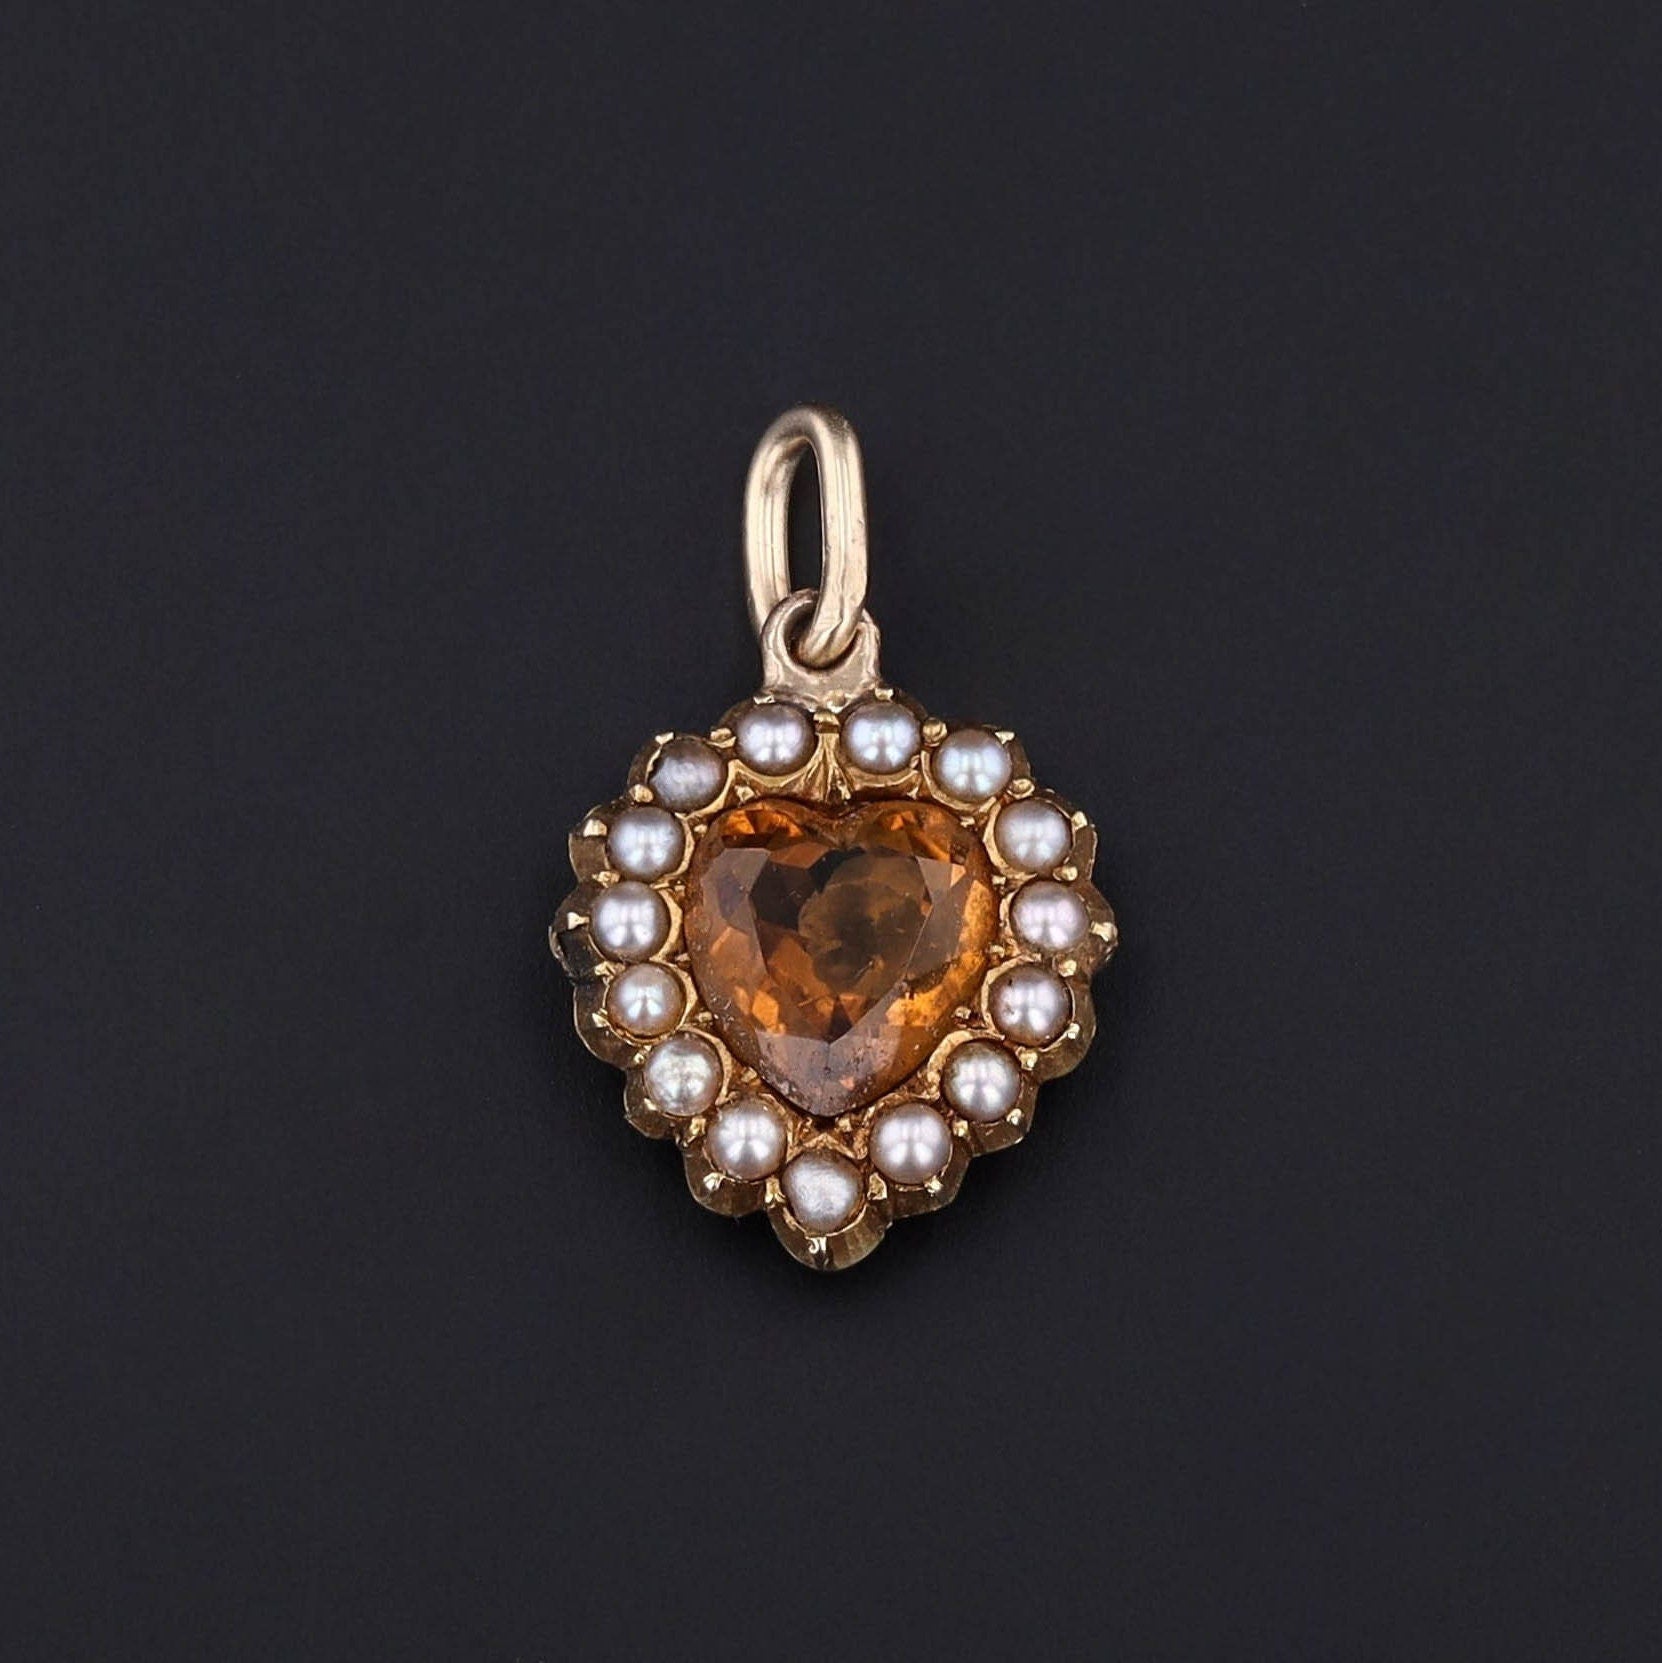 Antique Citrine and Pearl Heart Charm of 15ct Gold Created from an Antique Pin